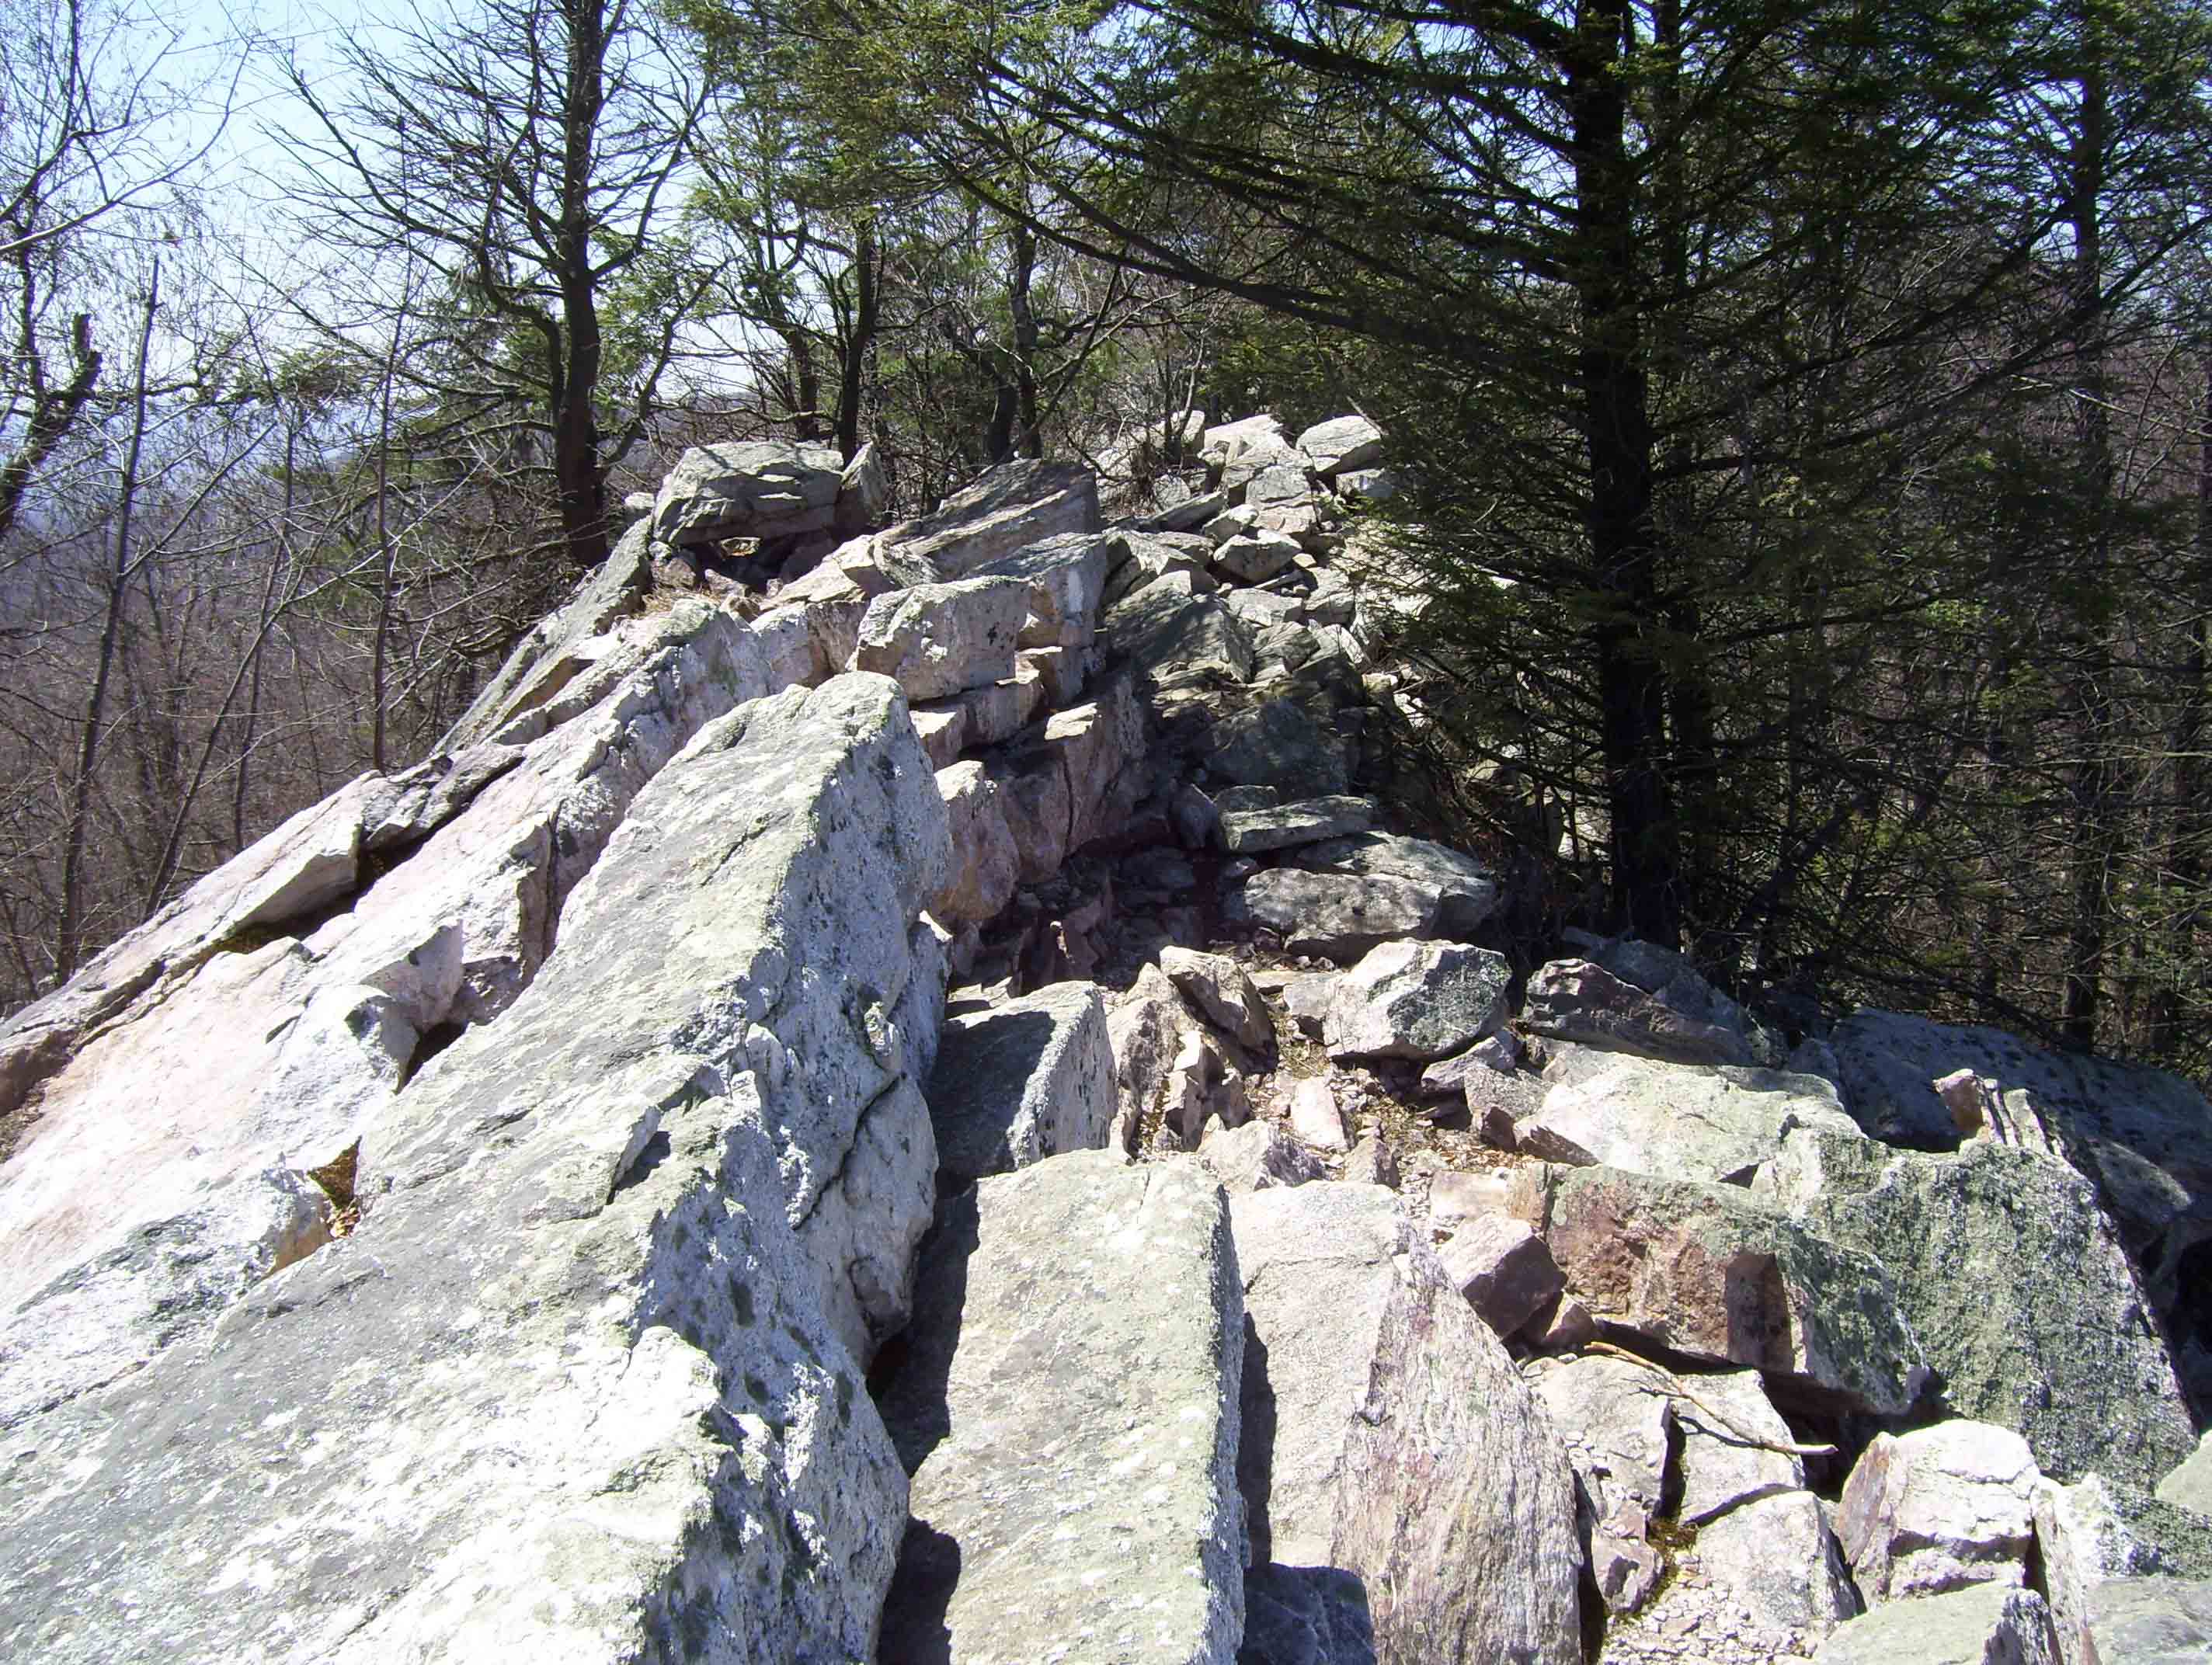 Trail route along the knife edge known as "The Cliffs" (MM 10.5).  Courtesy dlcul@conncoll.edu